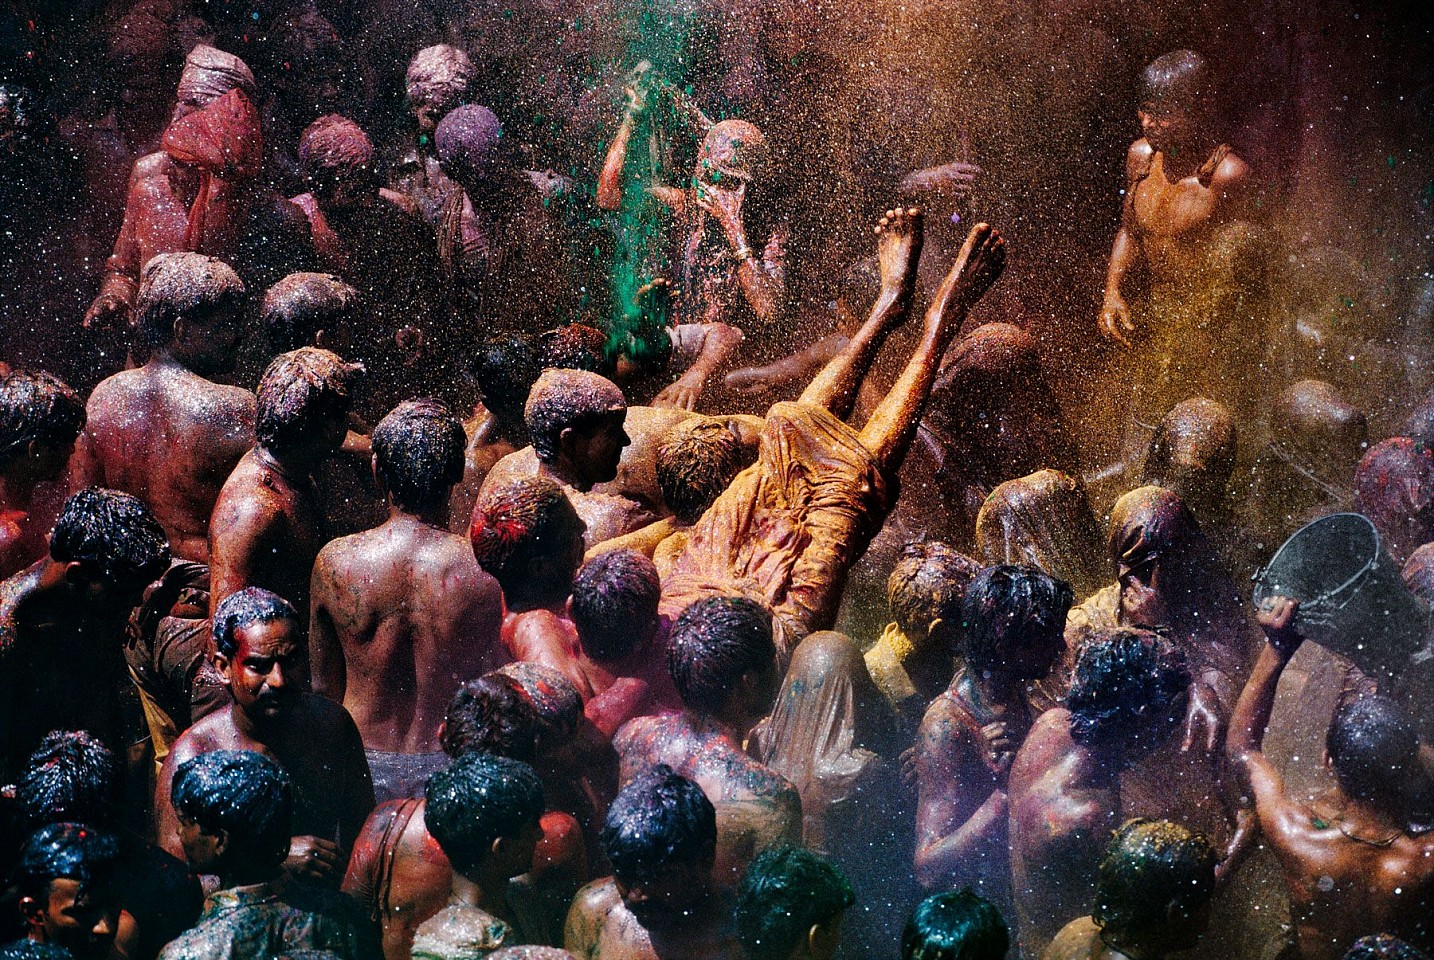 Steve McCurry, Villagers Celebrate Holy Festival, 1996
FujiFlex Crystal Archive Print
Price/Size on request